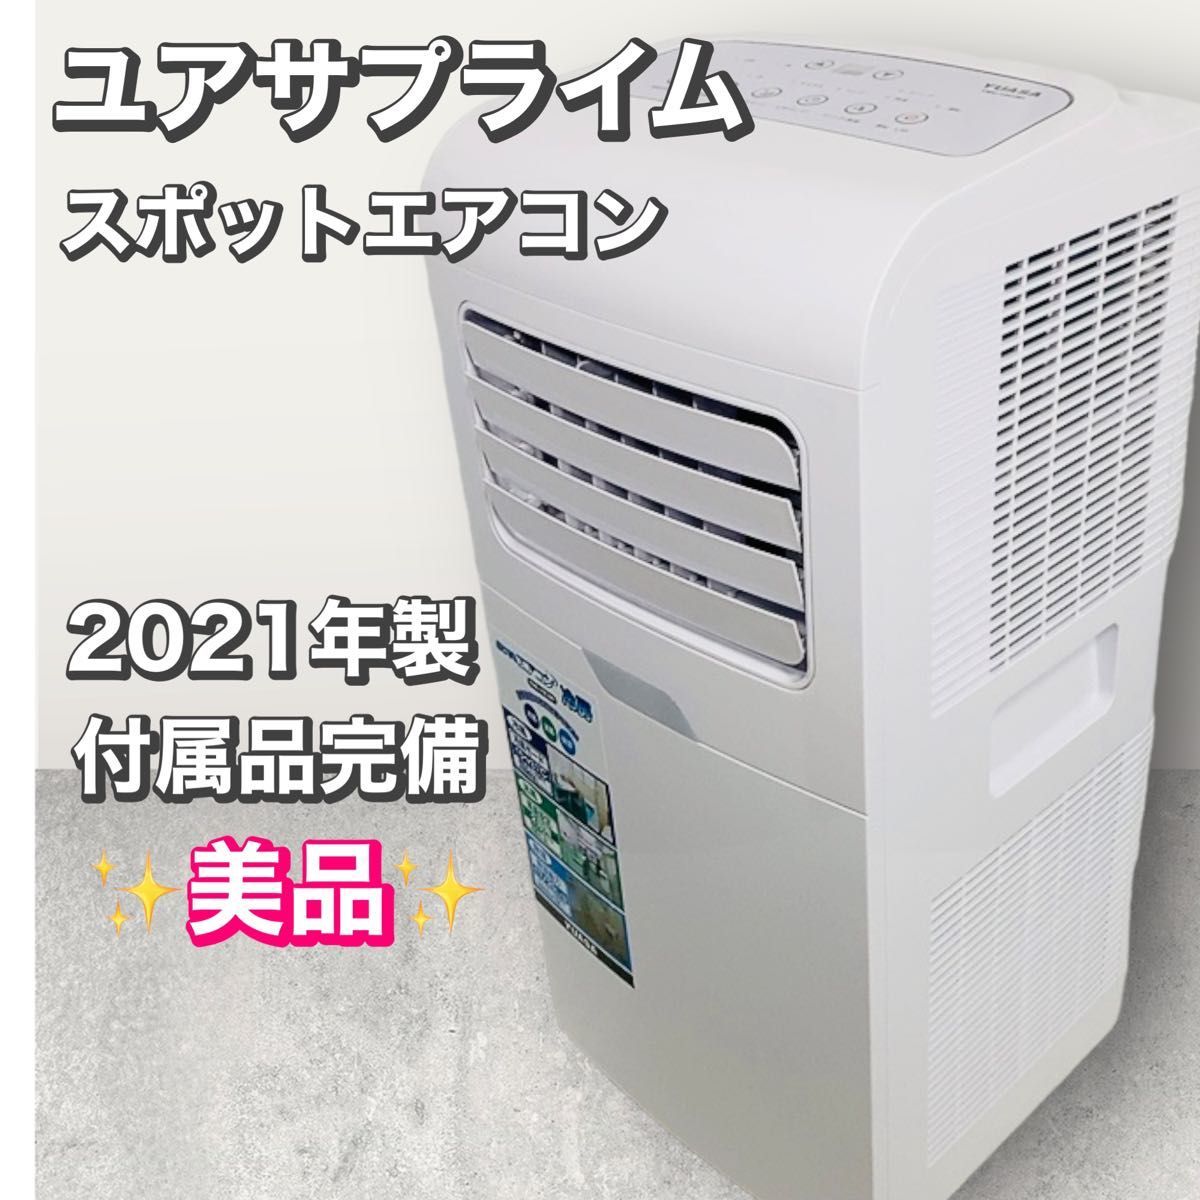  use barely YUASAyua supply ms anywhere air conditioner cooling YMC-15C(W) cold manner movement type air conditioner with casters .2021 year made 